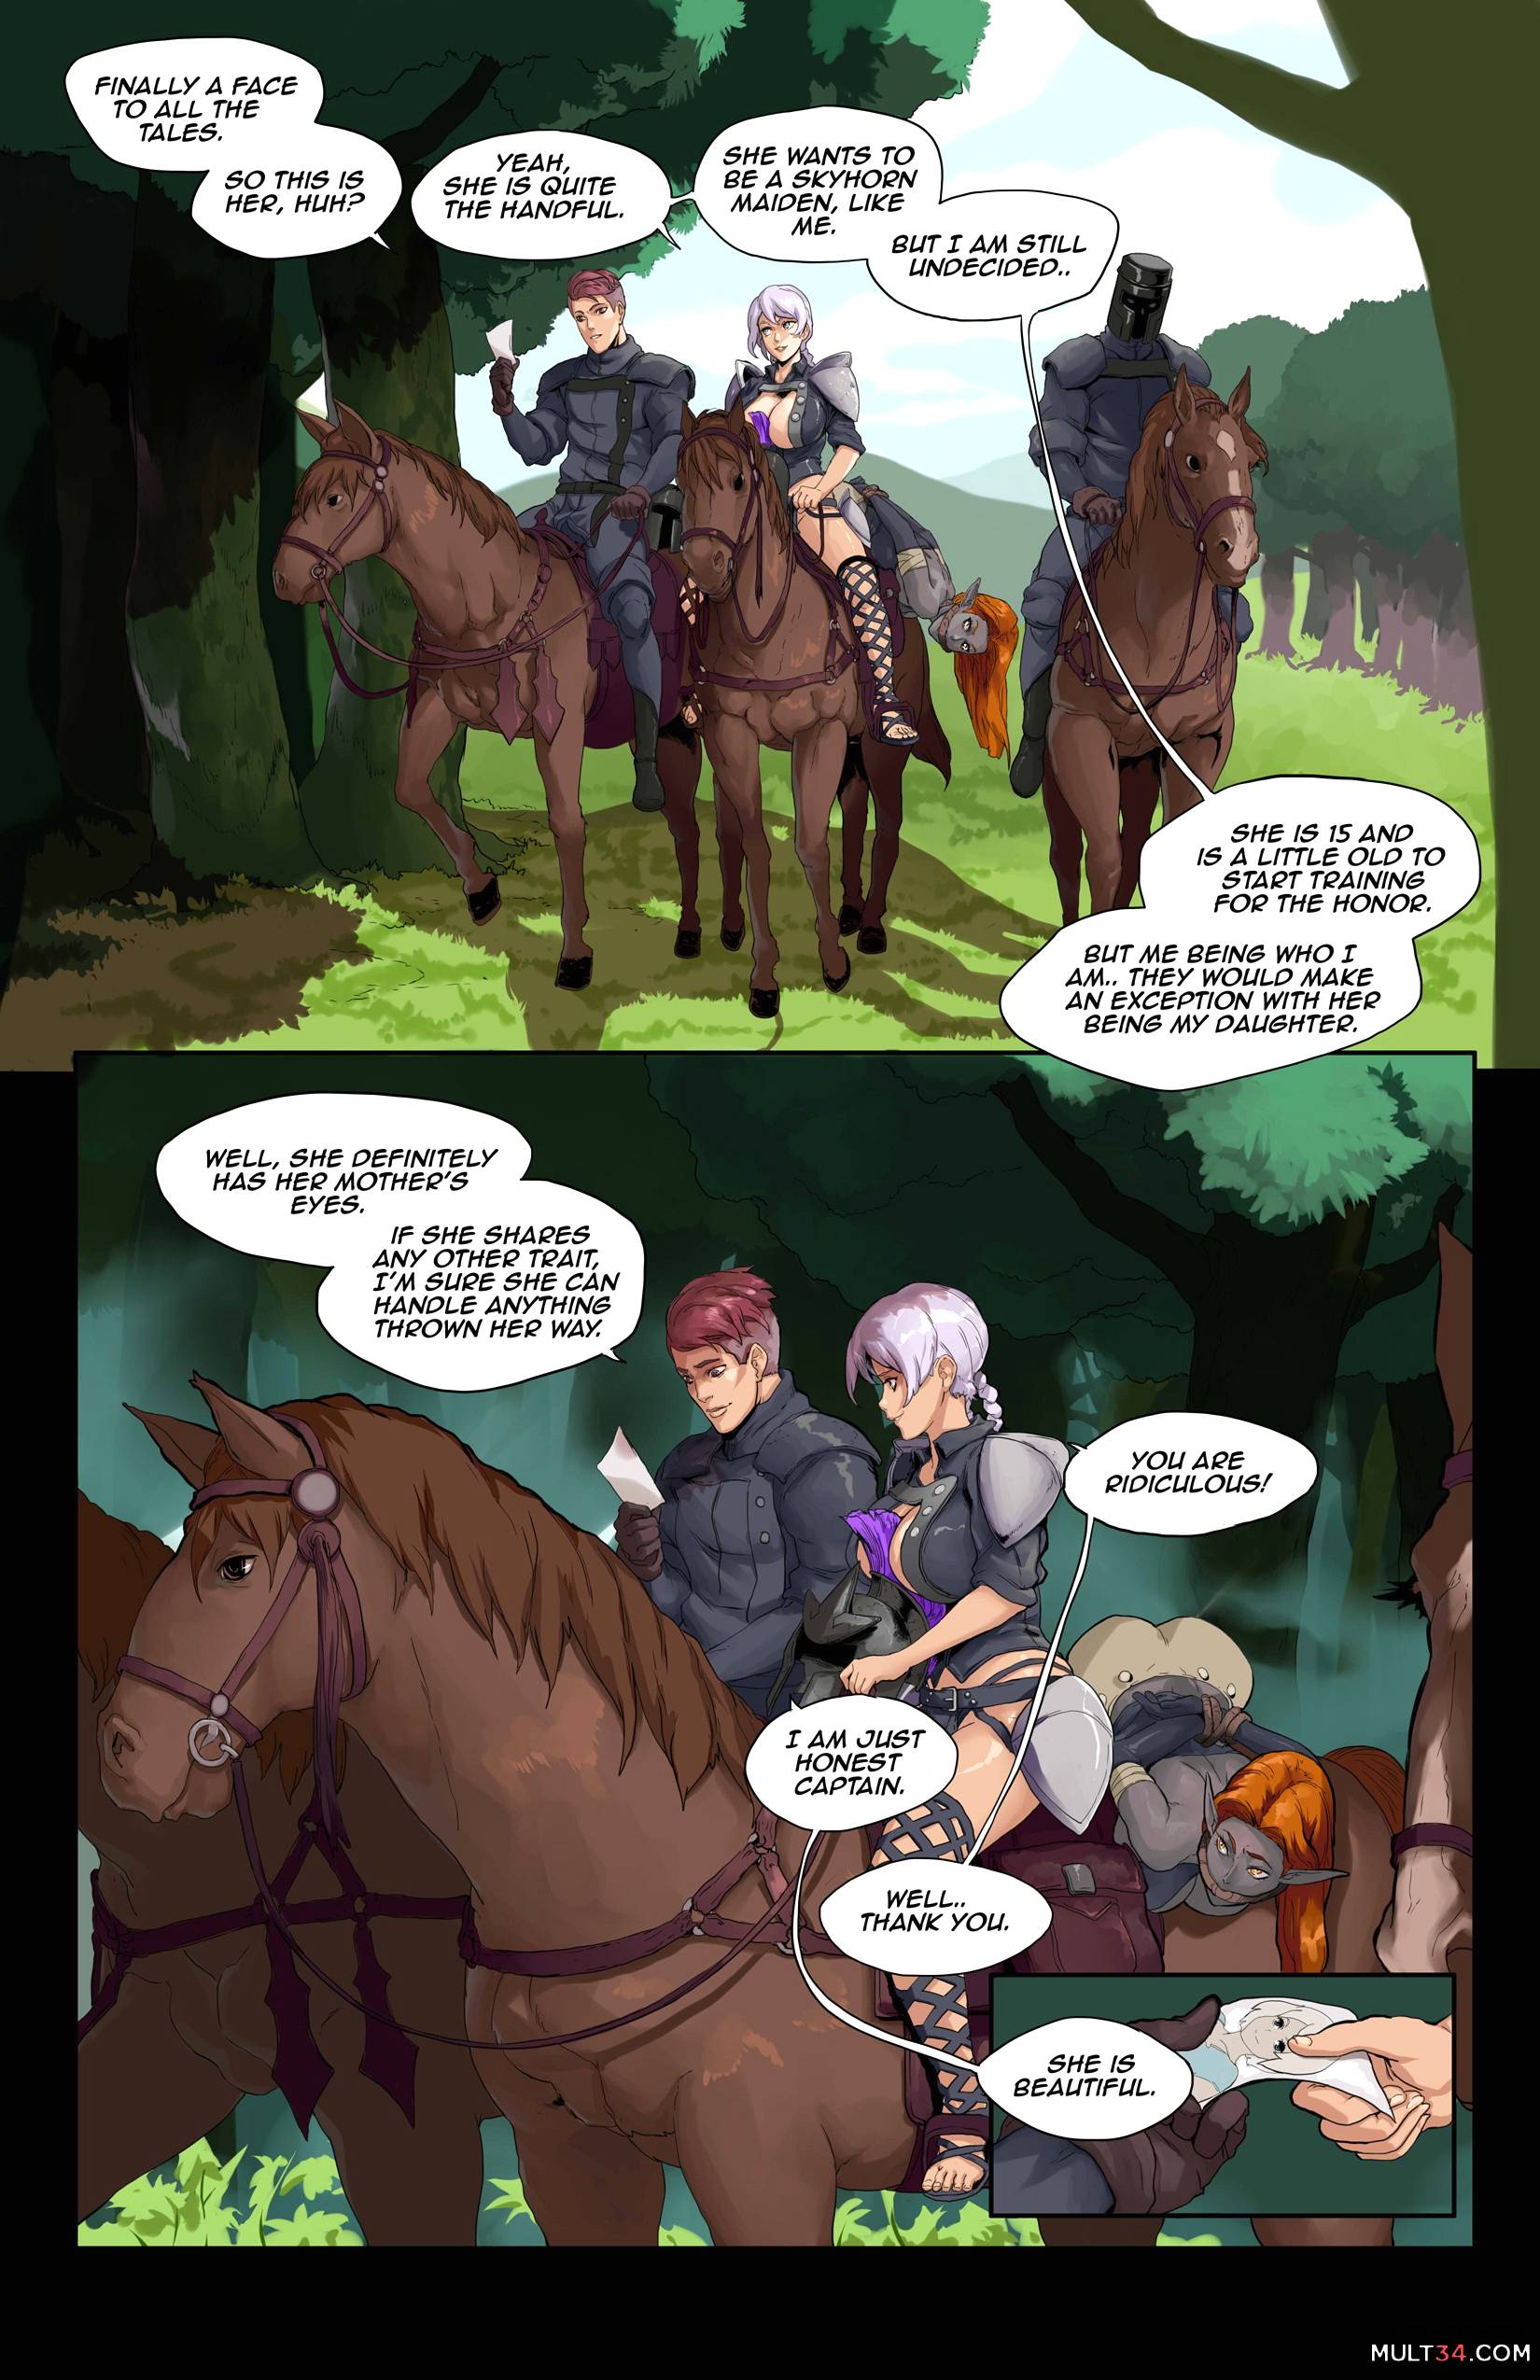 Tales of Beatrix - Knight and Mare page 1